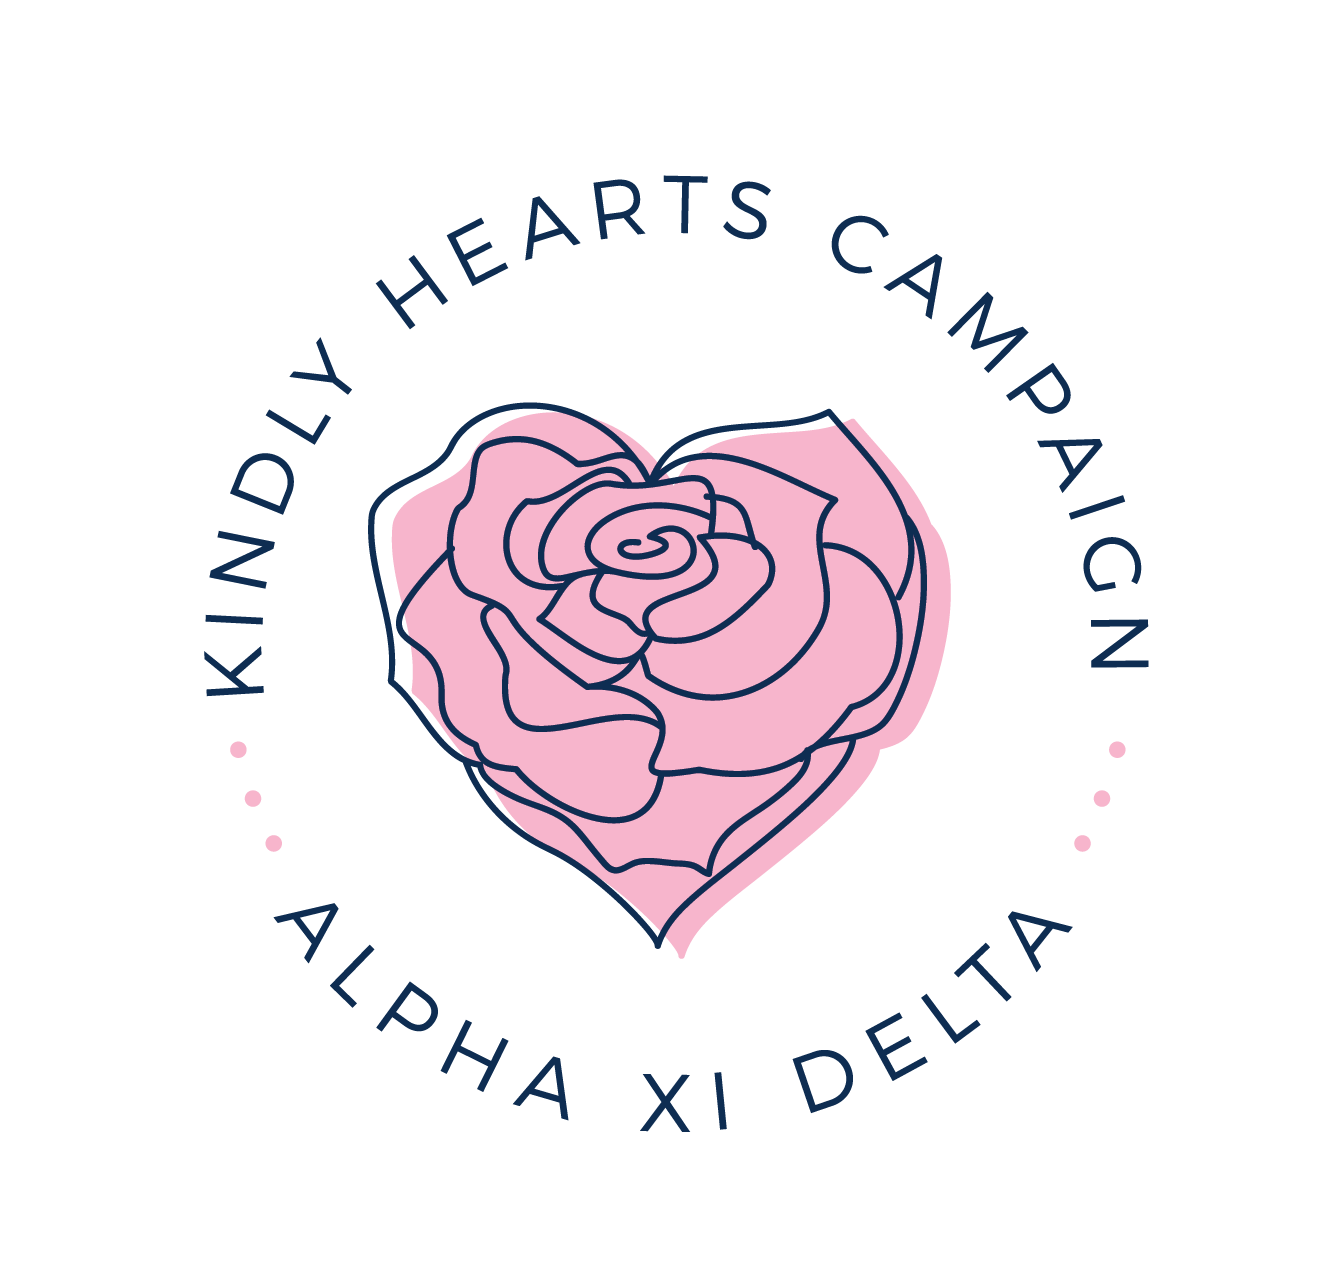 Kindly Hearts Campaign logo featuring a pink heart and graphic rose